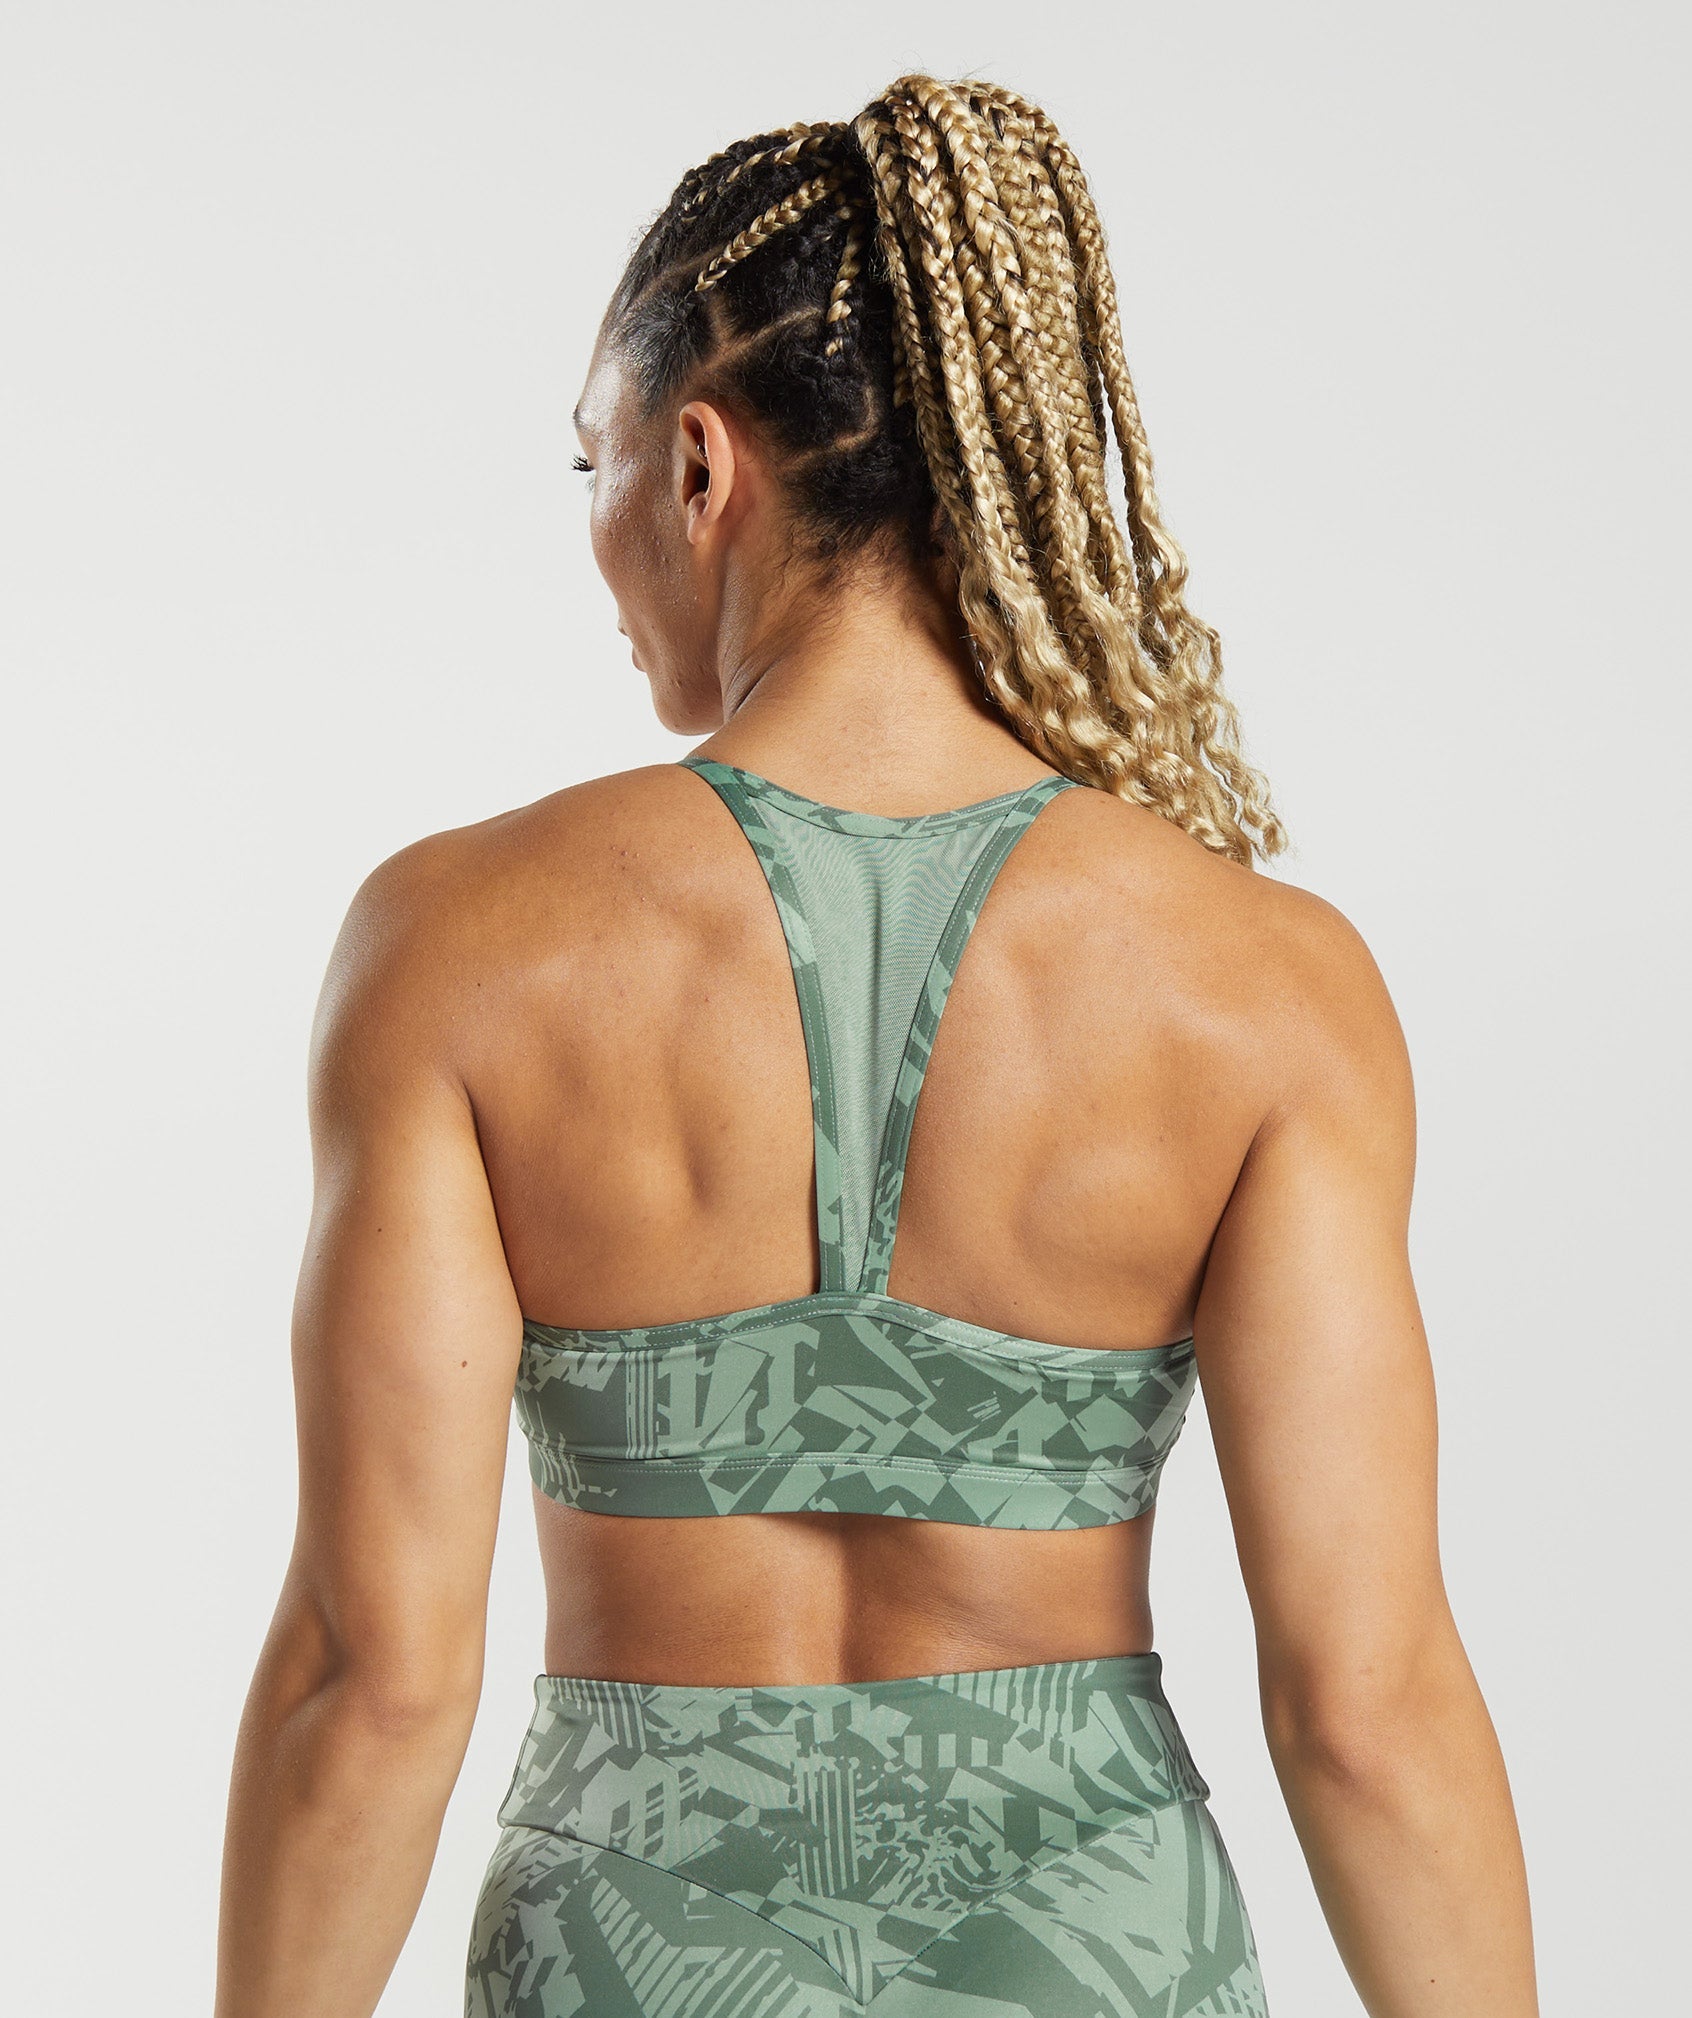 Gymshark CROSSOVER SPORTS BRA in Desert Sage Green Size Small ($36) - $28  New With Tags - From Brooke